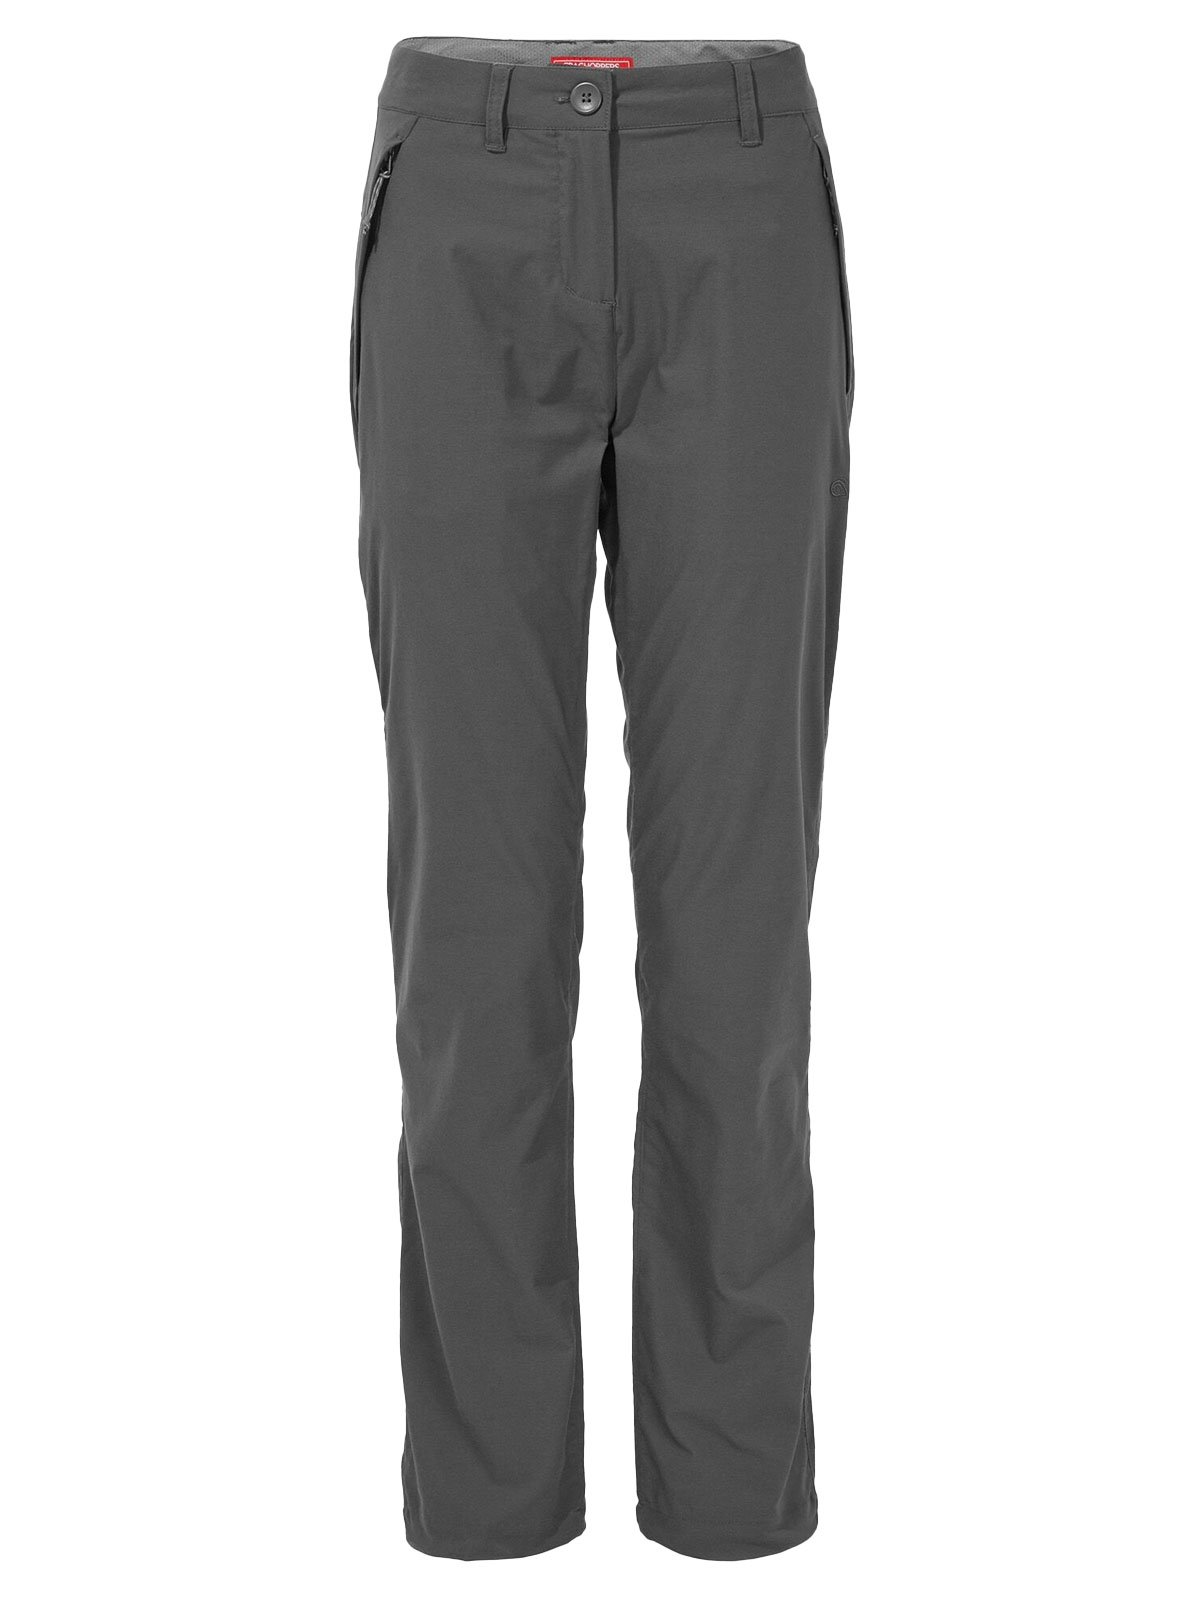 Nosilife Pro Trousers (Dame)